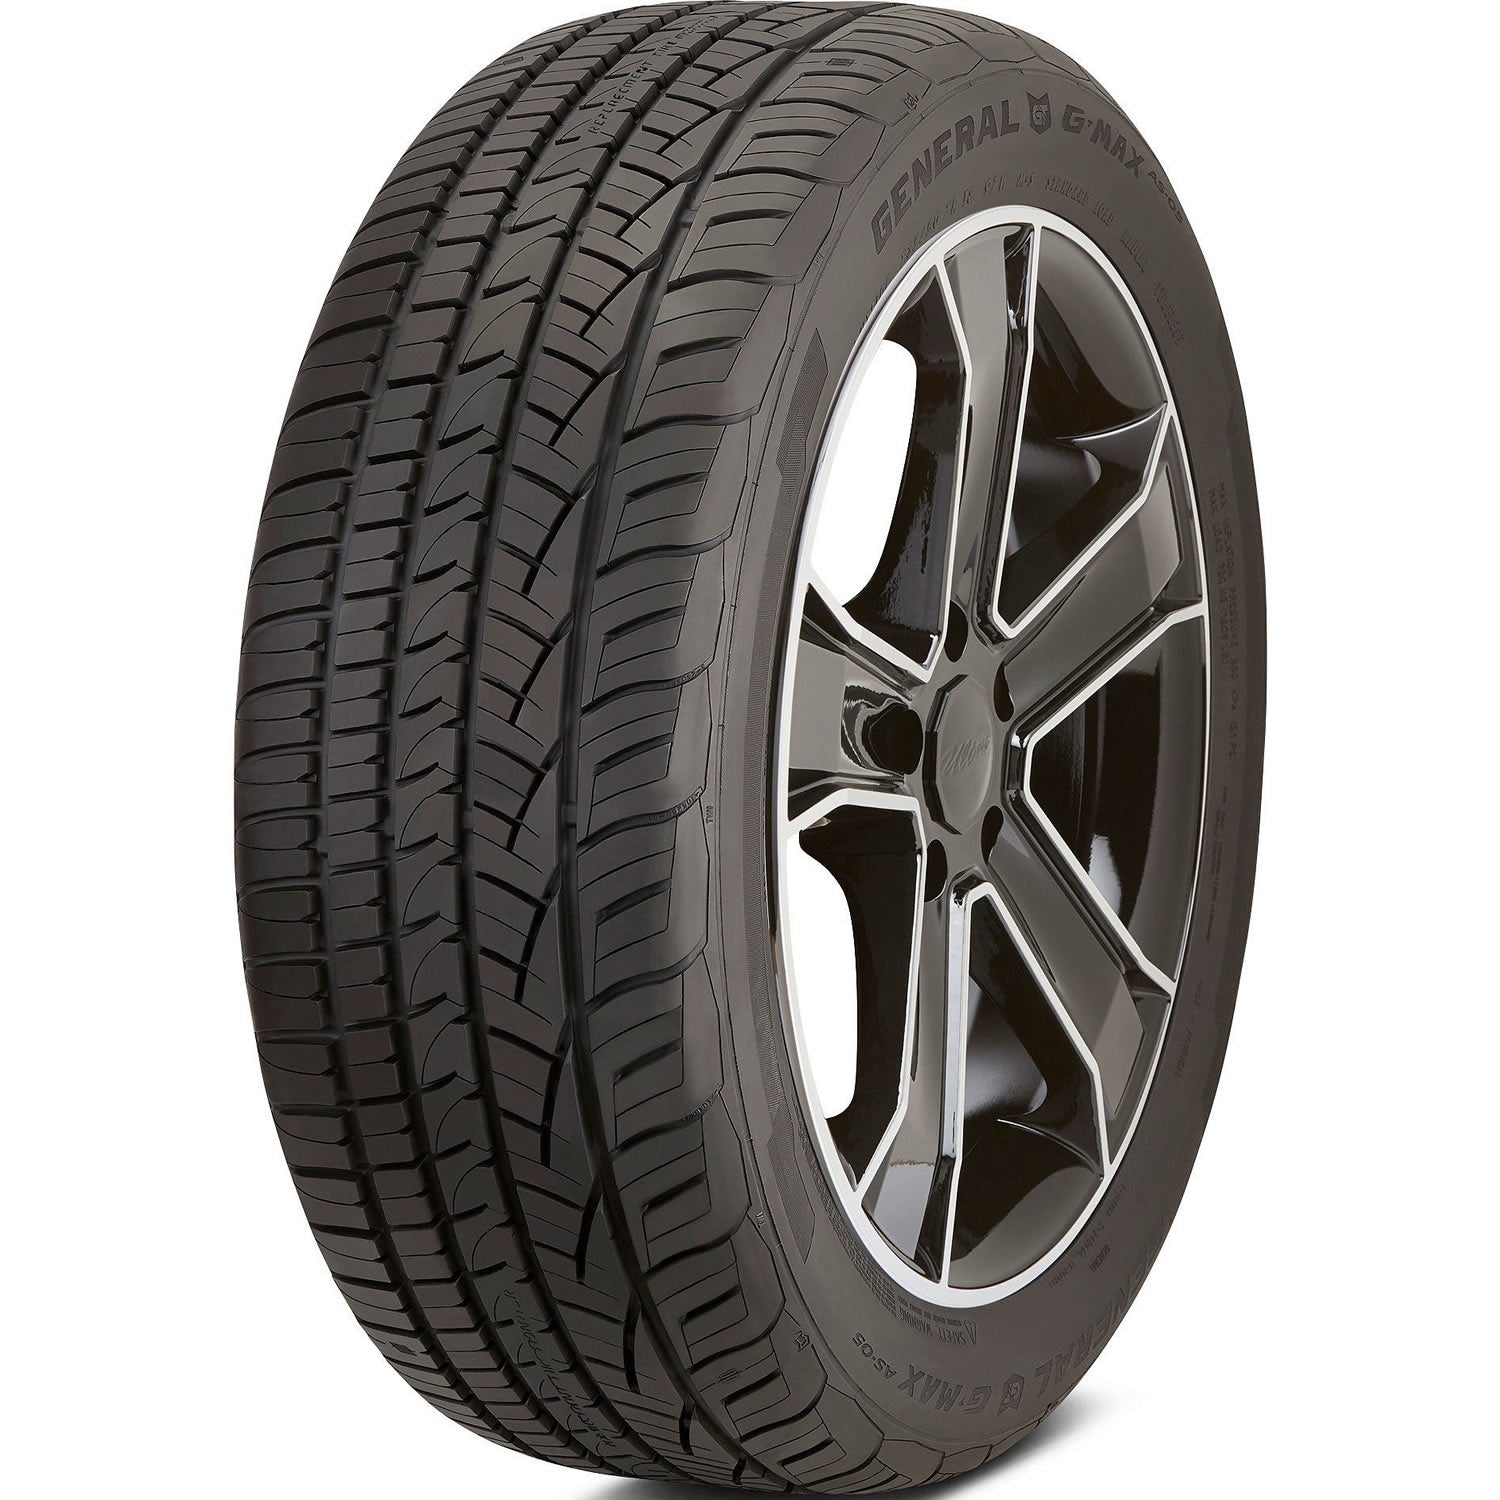 GENERAL G-MAX AS-05 255/40ZR19 (27X10R 19) Tires